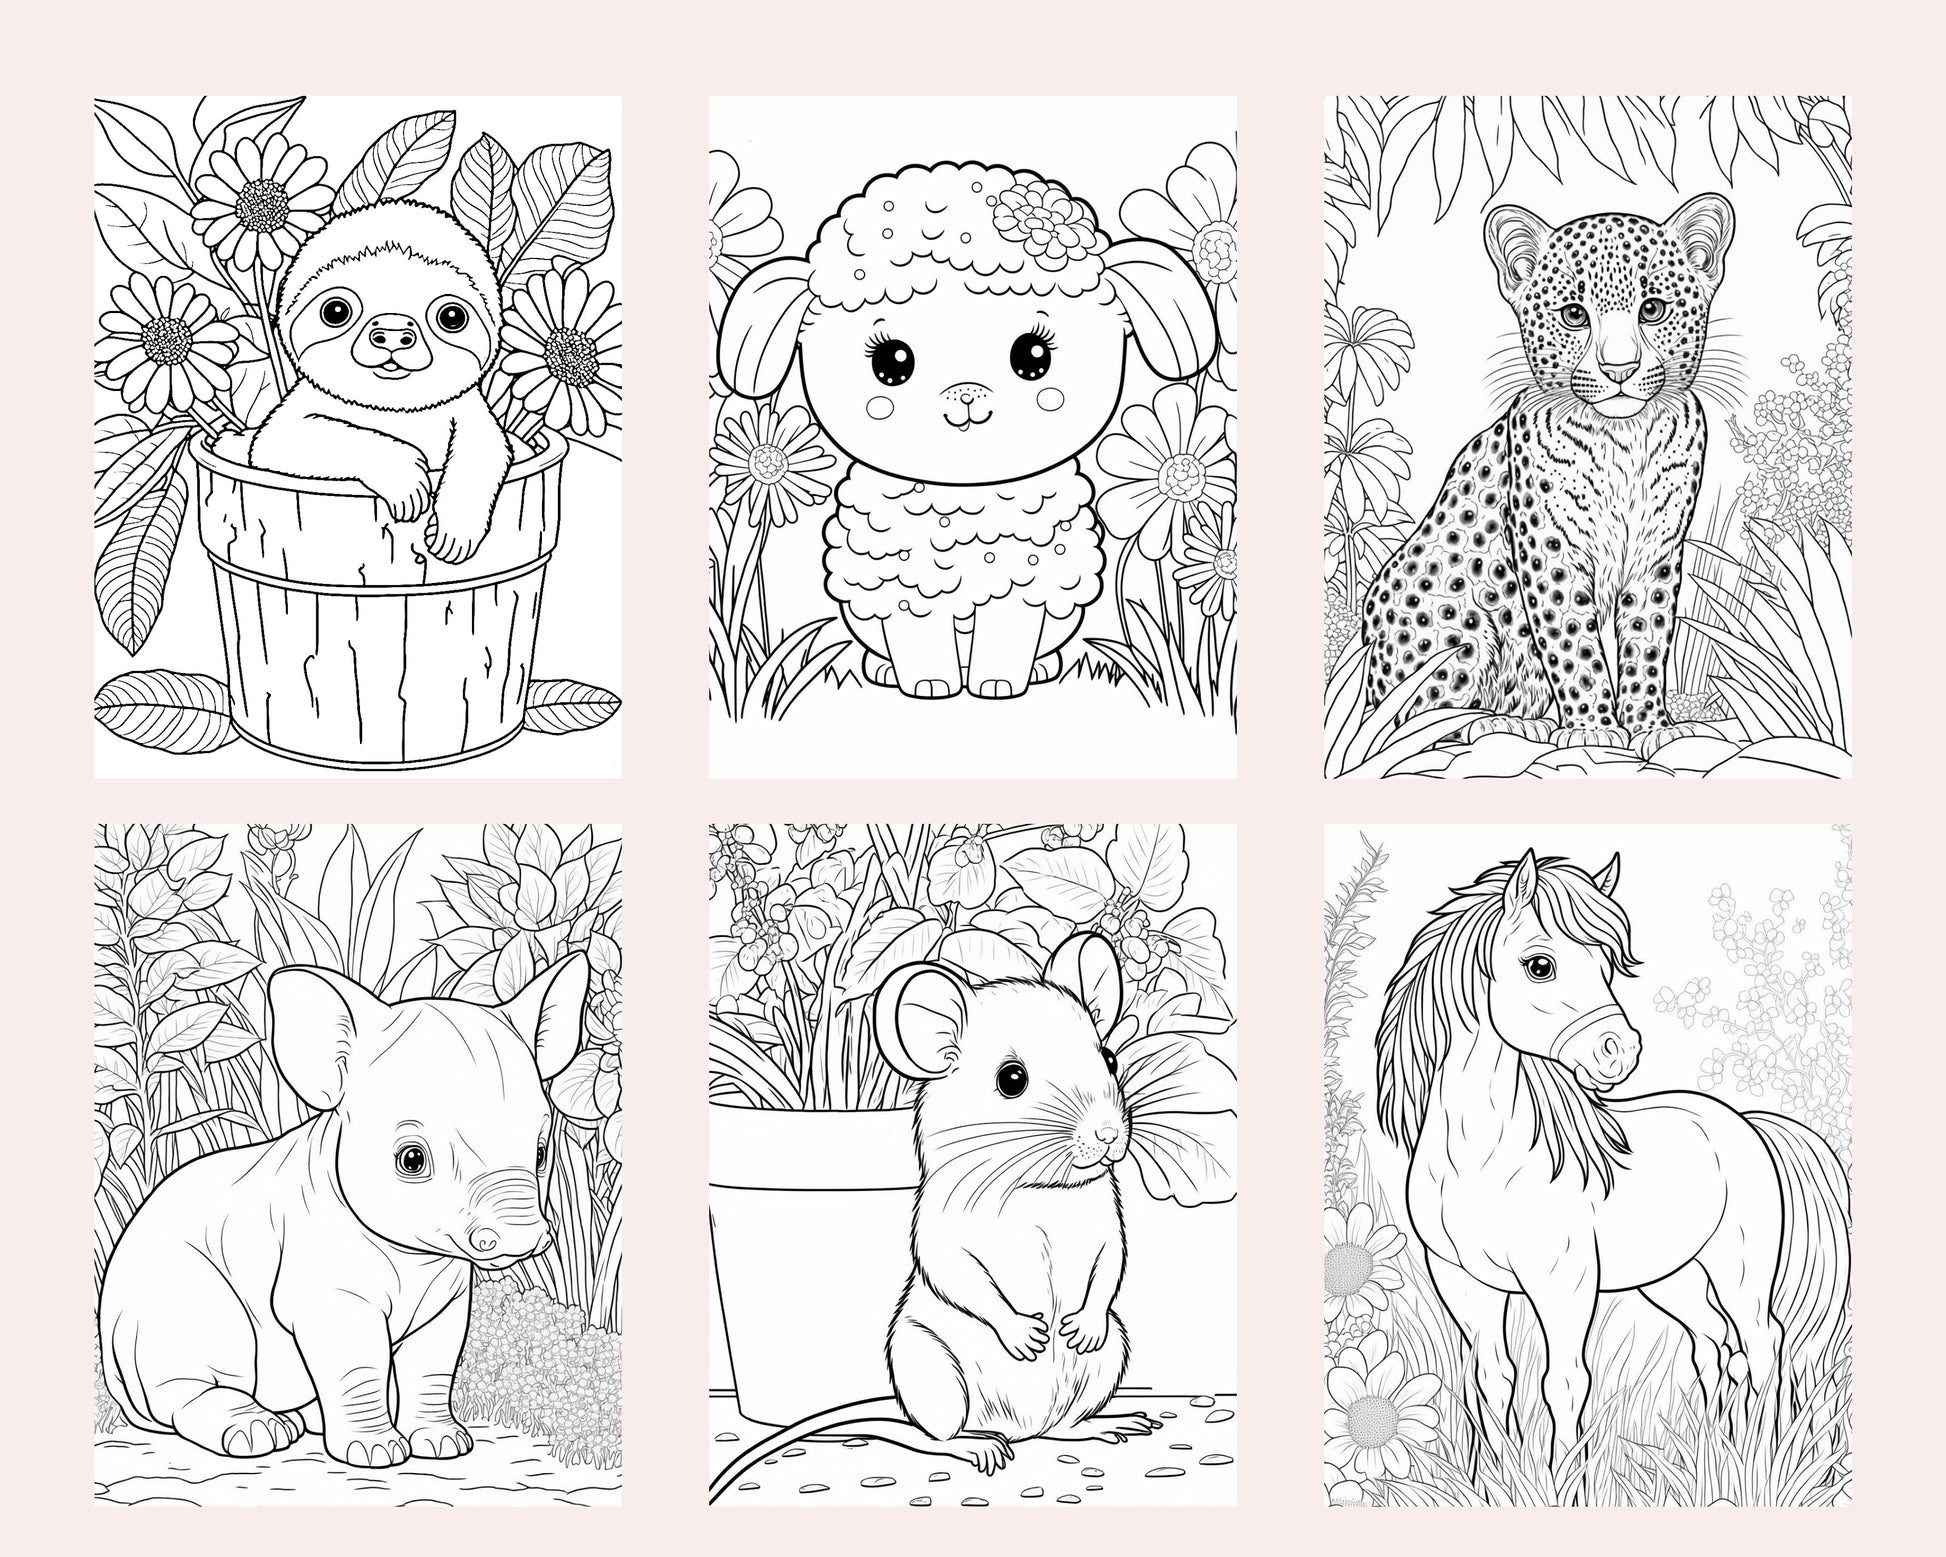 Cute animals printable coloring pages for kids printable pdf file â coloring